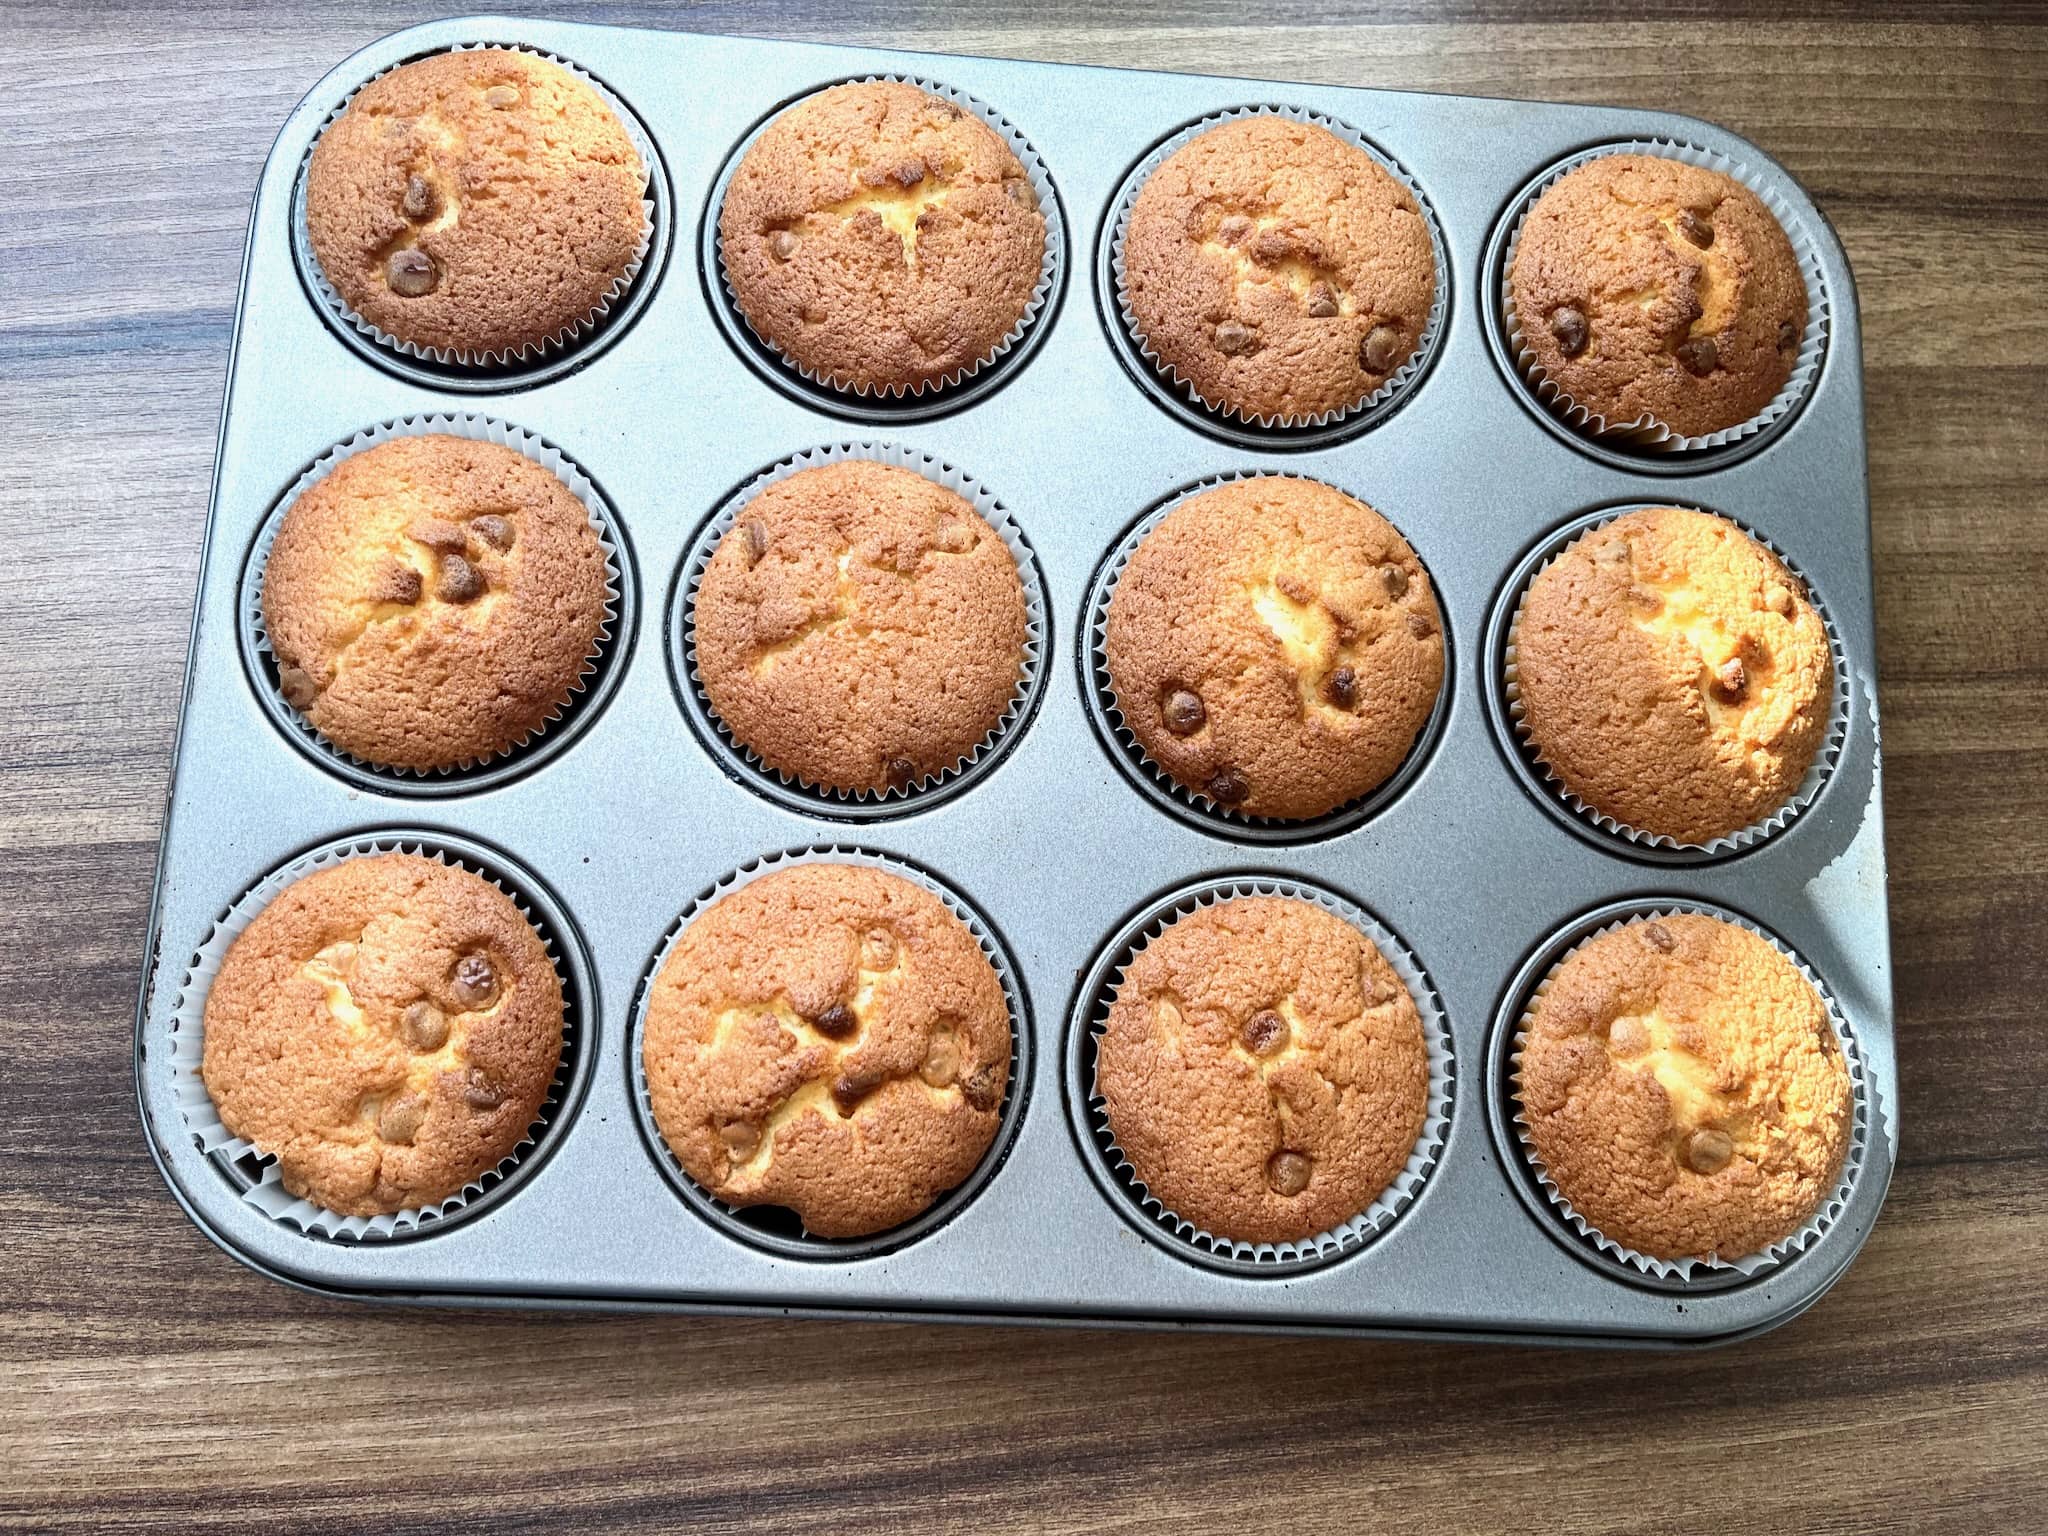 Nicely baked muffins, straight from the oven